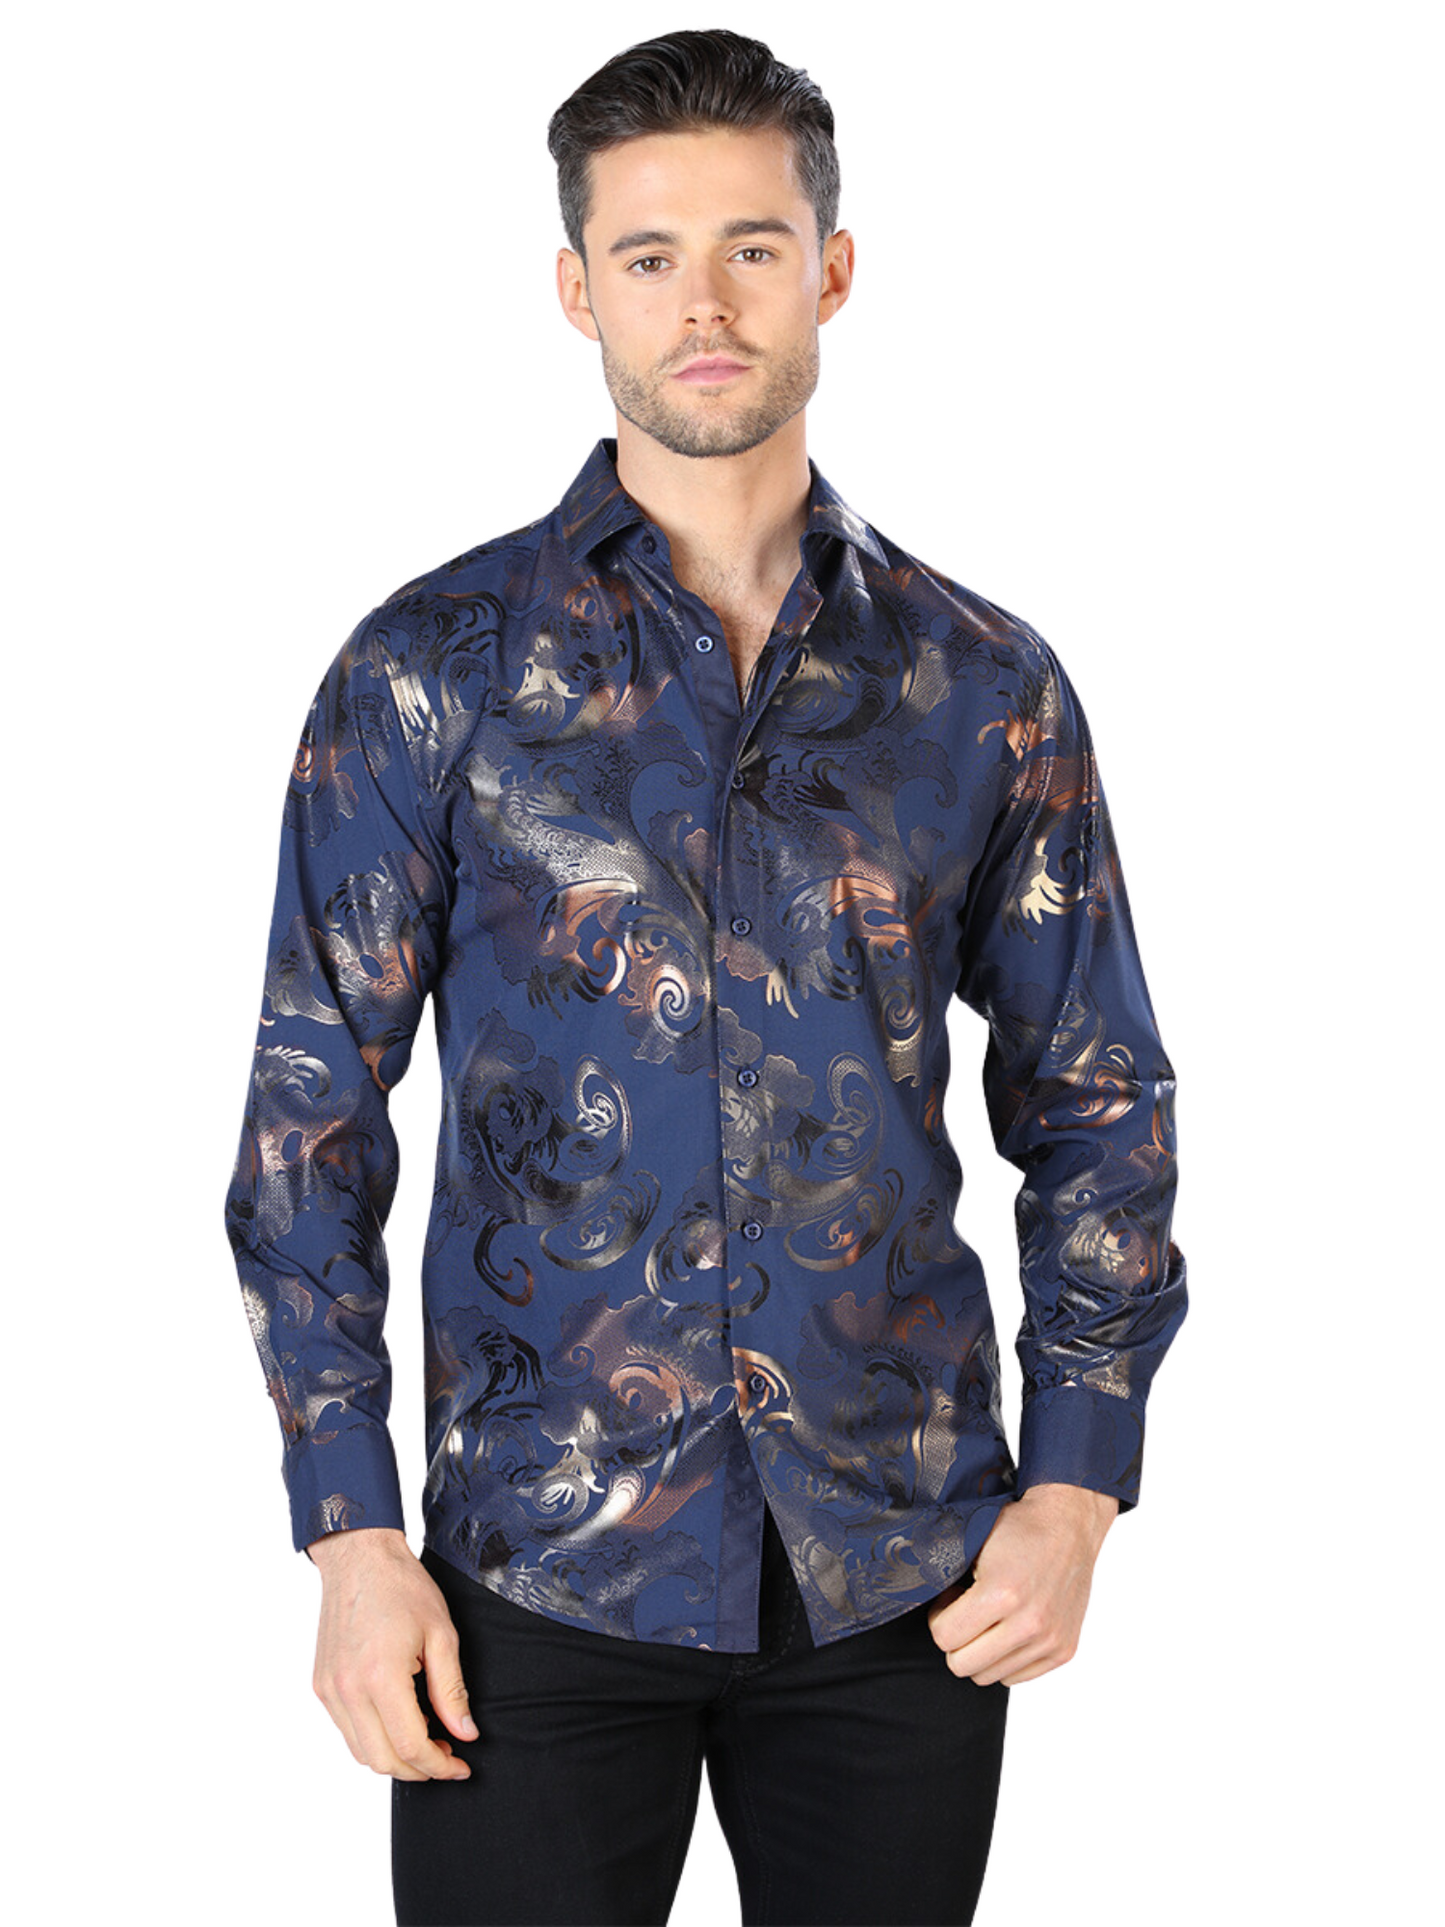 Gold/Black Printed Long Sleeve Casual Shirt for Men 'The Lord of the Skies' - ID: 44036 Casual Shirt The Lord of the Skies Black/Gold